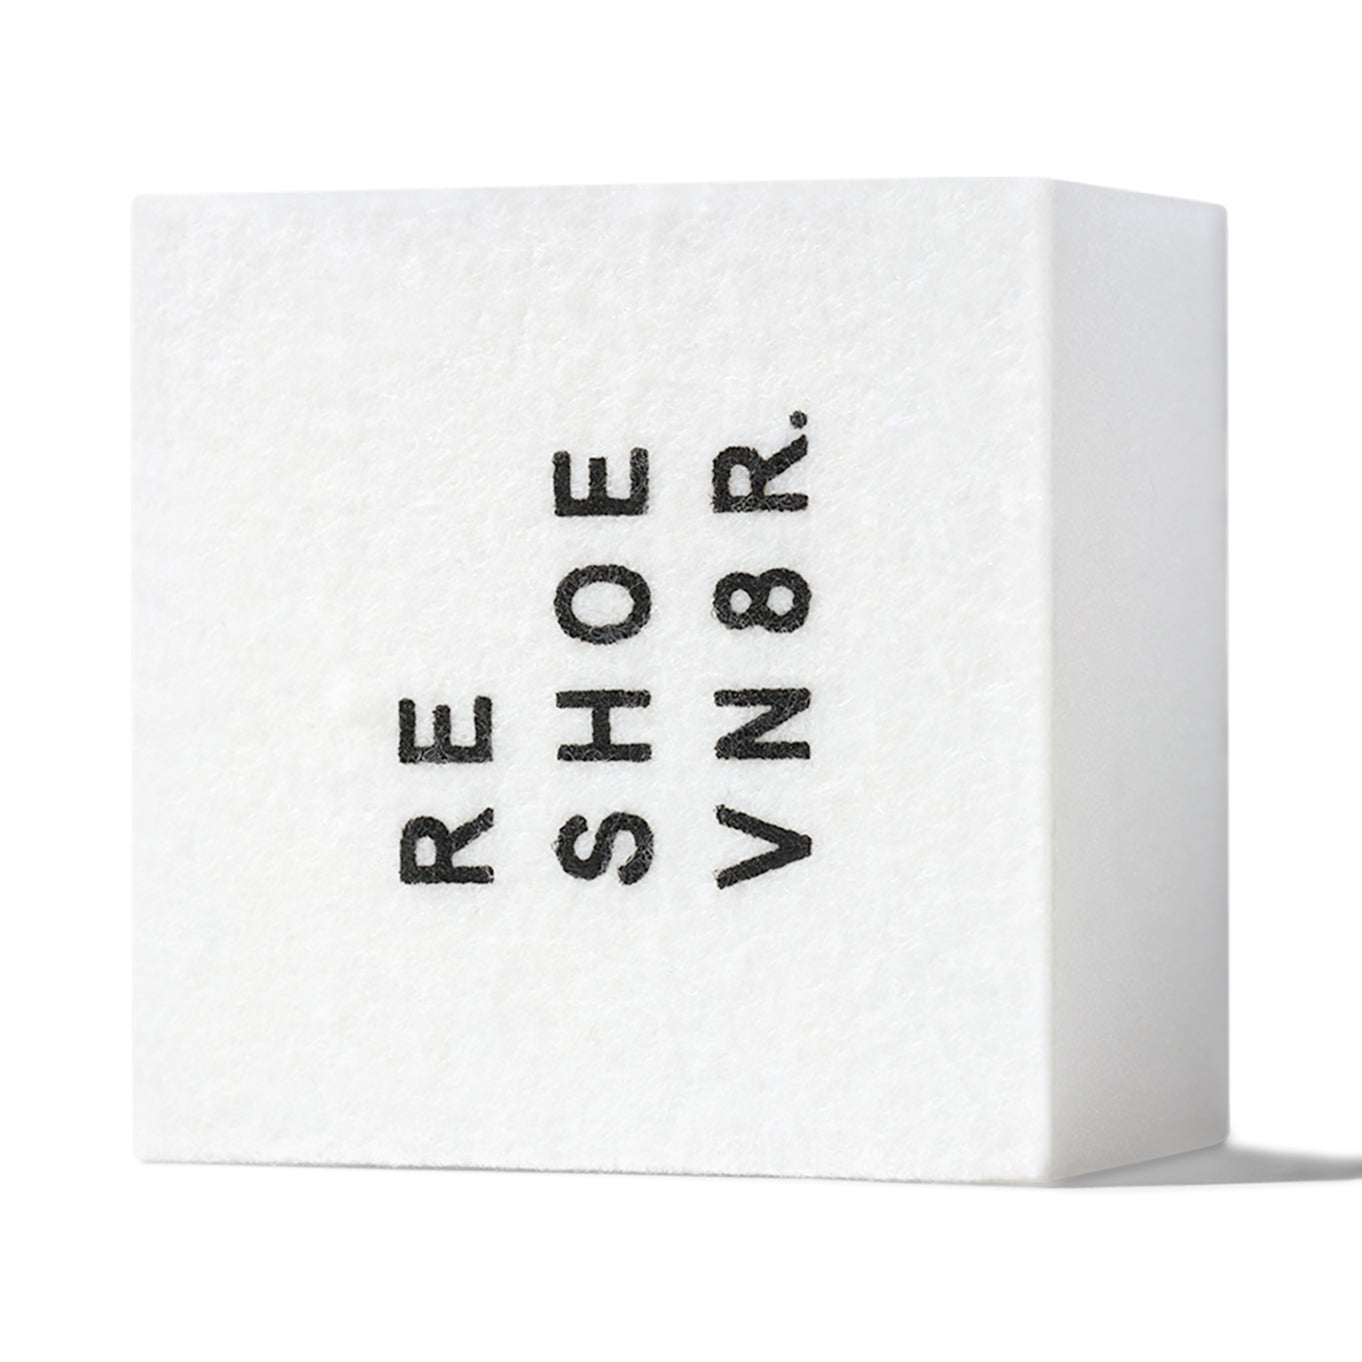 A white shoe cleaning sponge with black text that says "RESHOEVN8R" sitting on a white surface.